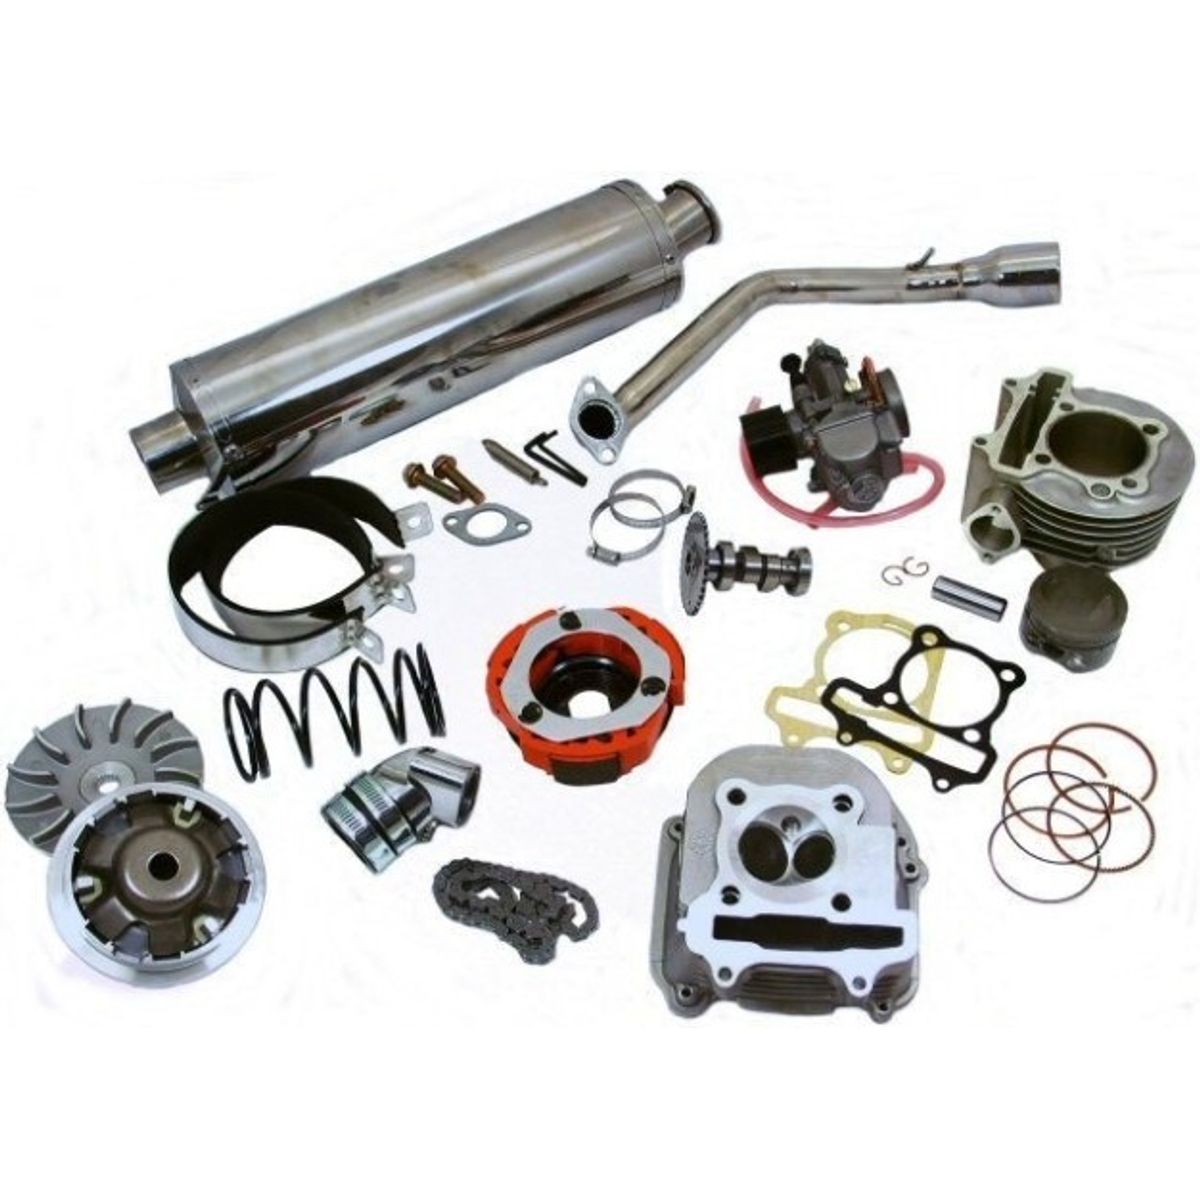 Dirt Oval Racing Parts